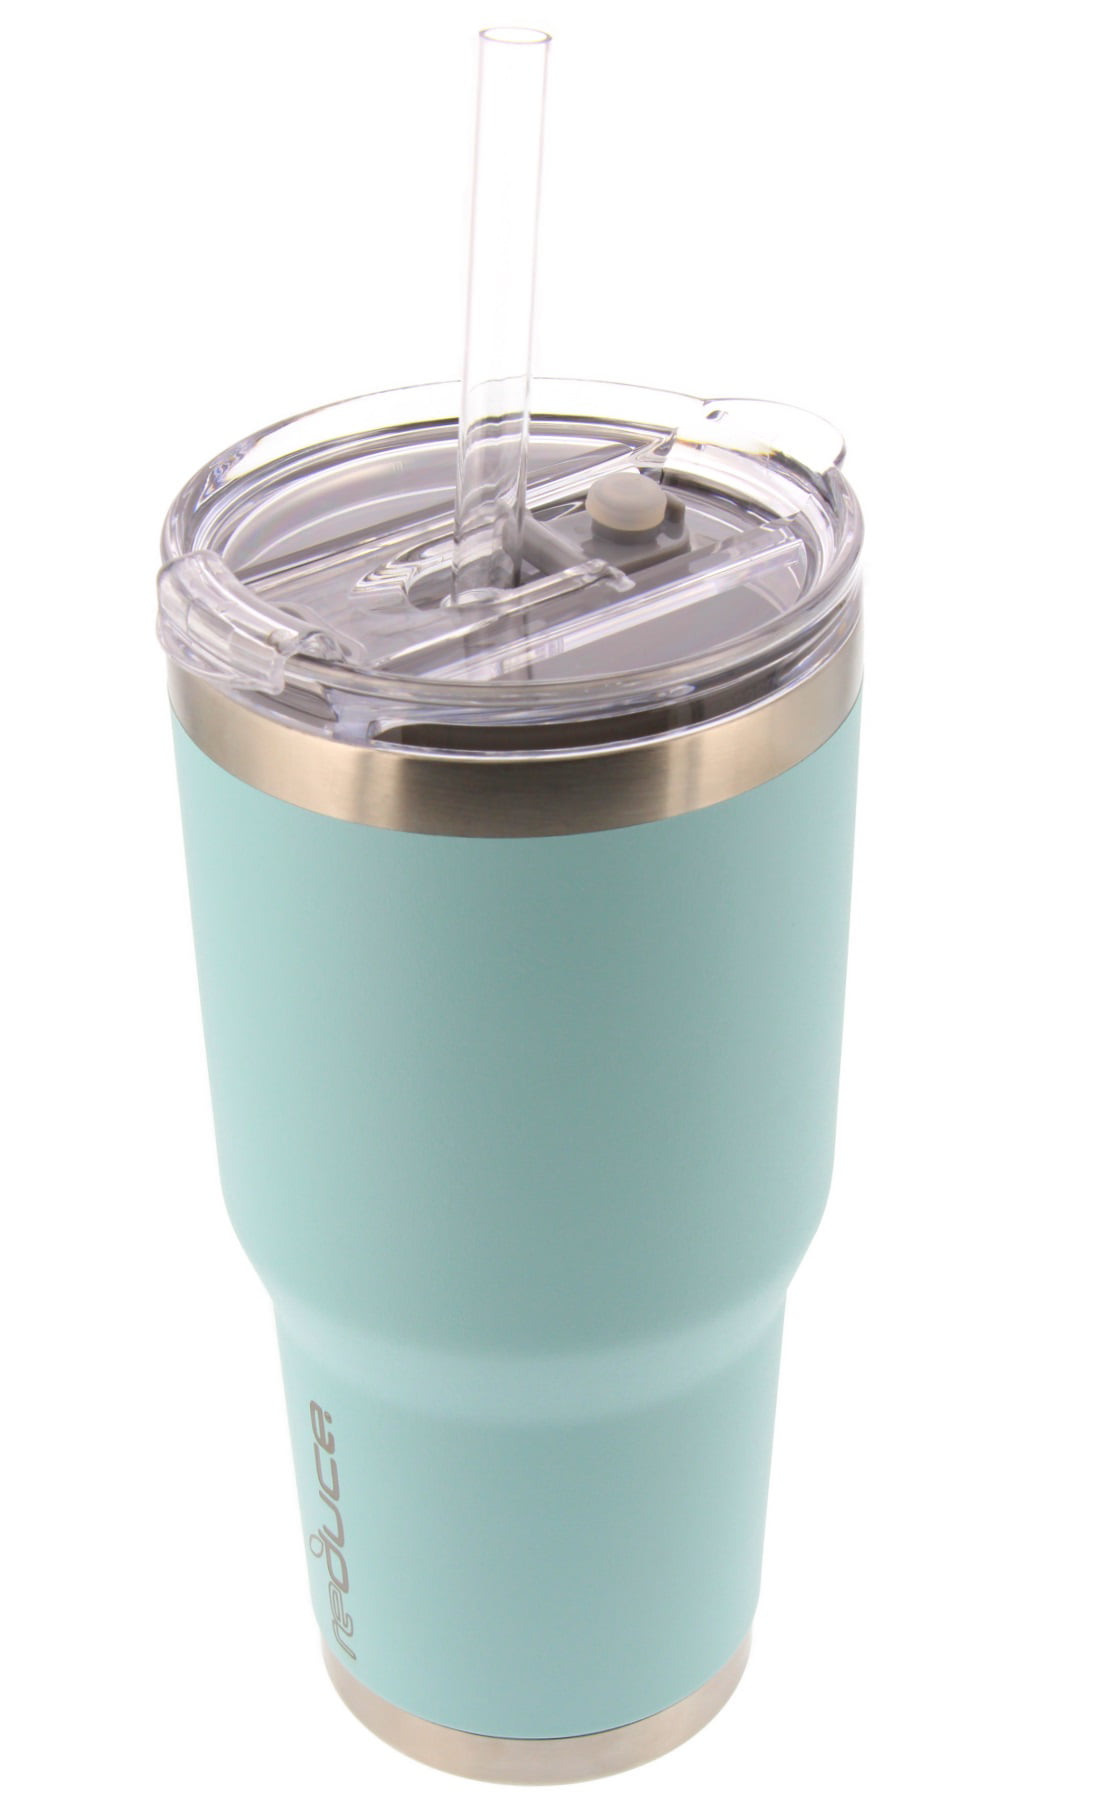 Reduce Tumbler, 34oz – Reduce Cold-1 Tumbler With Lid and Straw – 24 Hours  Cold – Stainless Steel, Sweat-Proof Body – Cupholder Friendly, Perfect for  Water and Coffee – Mint 